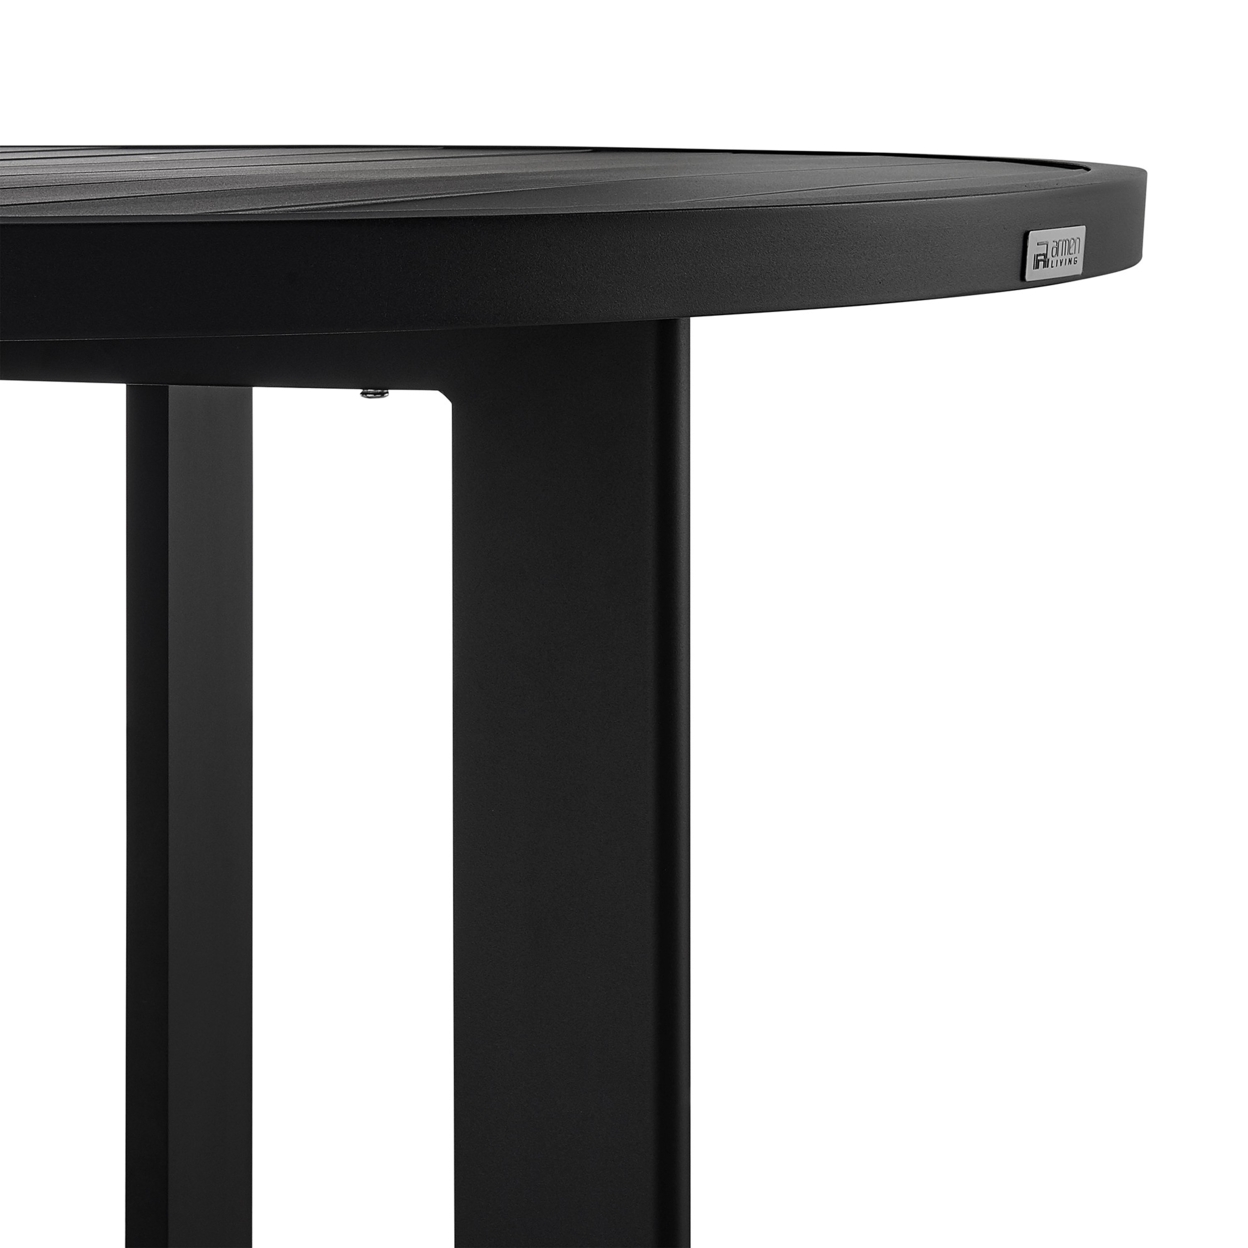 Ollie 48 Inch Patio Dining Table, Aluminum Frame And Round Tabletop, Black- Saltoro Sherpi